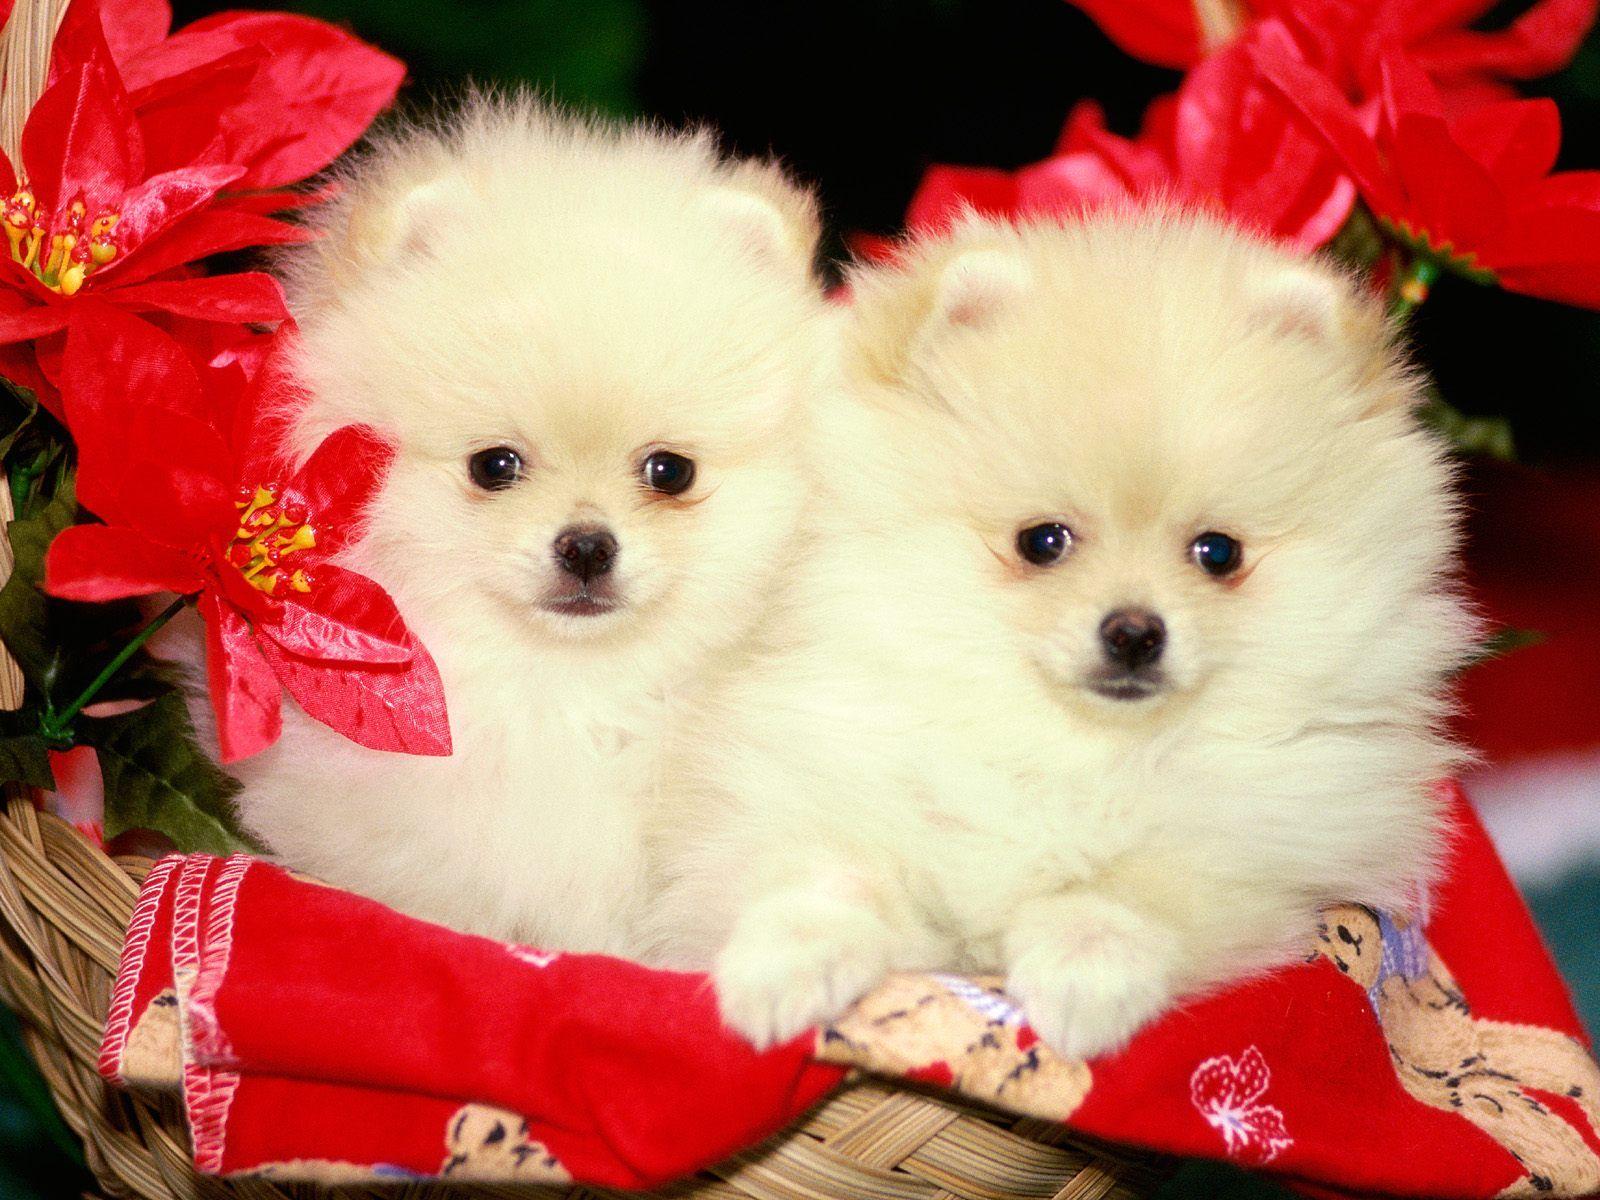 Christmas Pomeranian Puppies. Cute dog wallpaper, Cute white puppies, Puppy image